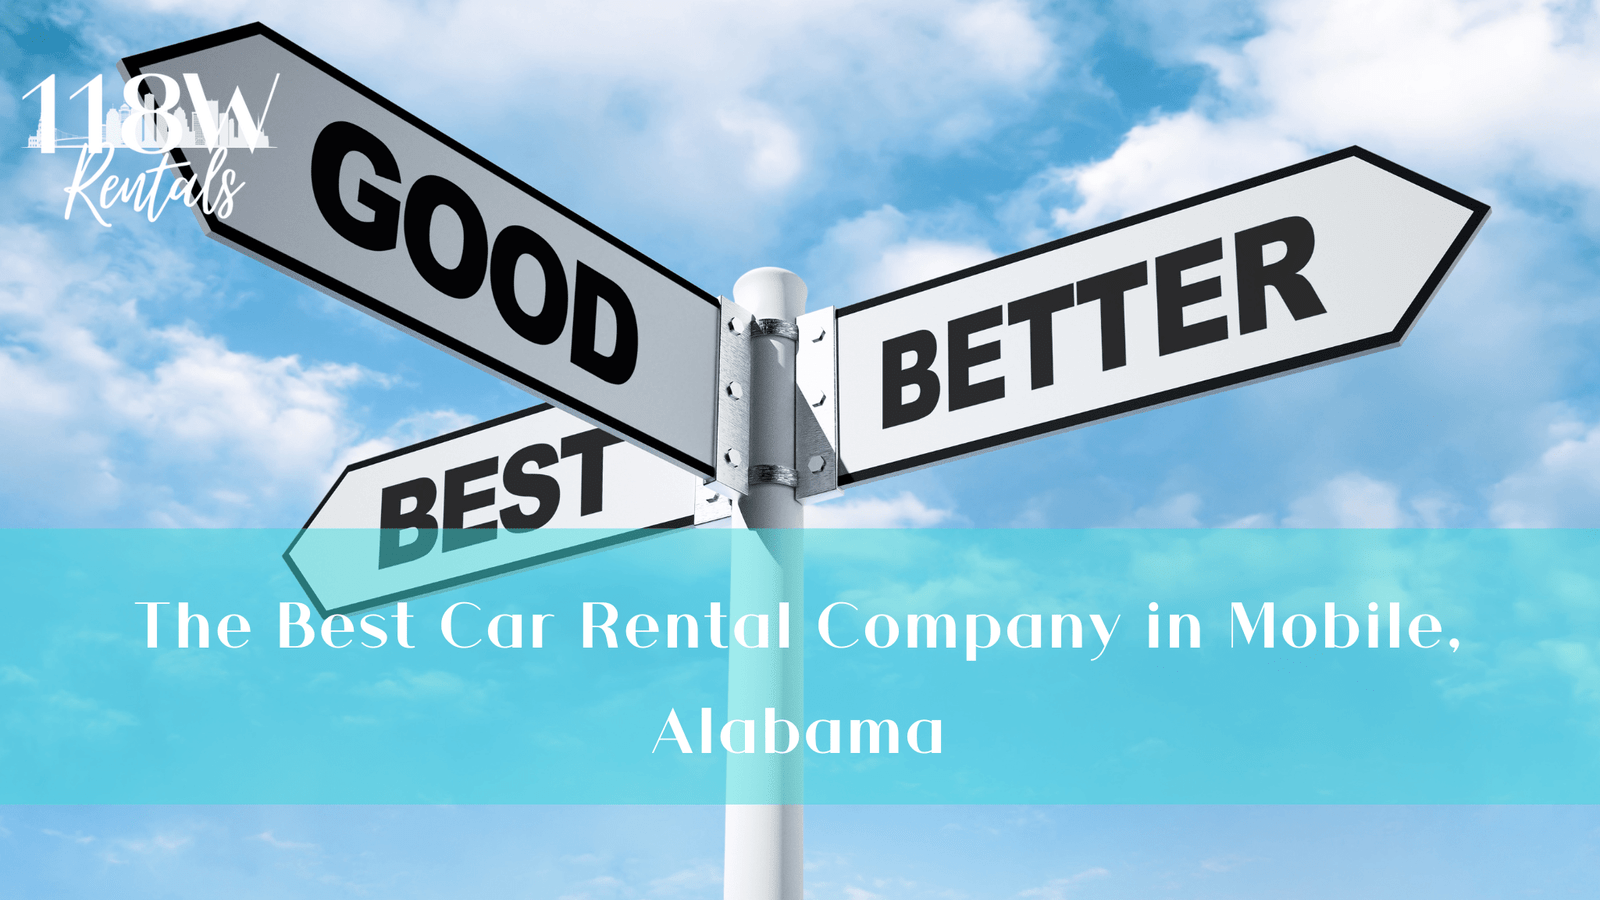 The Best Car Rental Company in Mobile, Alabama